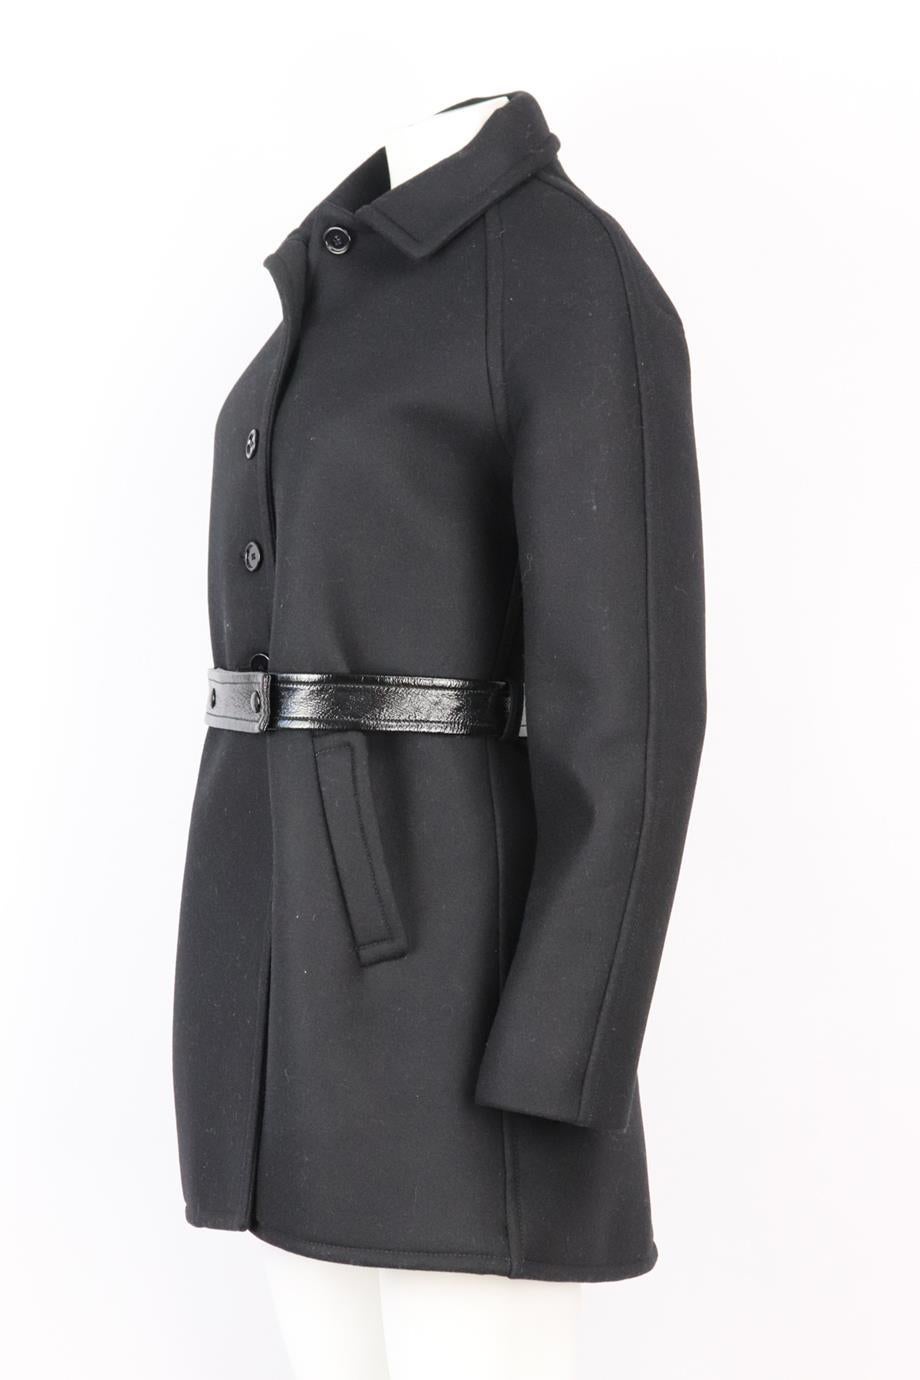 Courrēges Belted Leather Trimmed Wool Blend Coat Fr 38 Uk 10 In Excellent Condition In London, GB